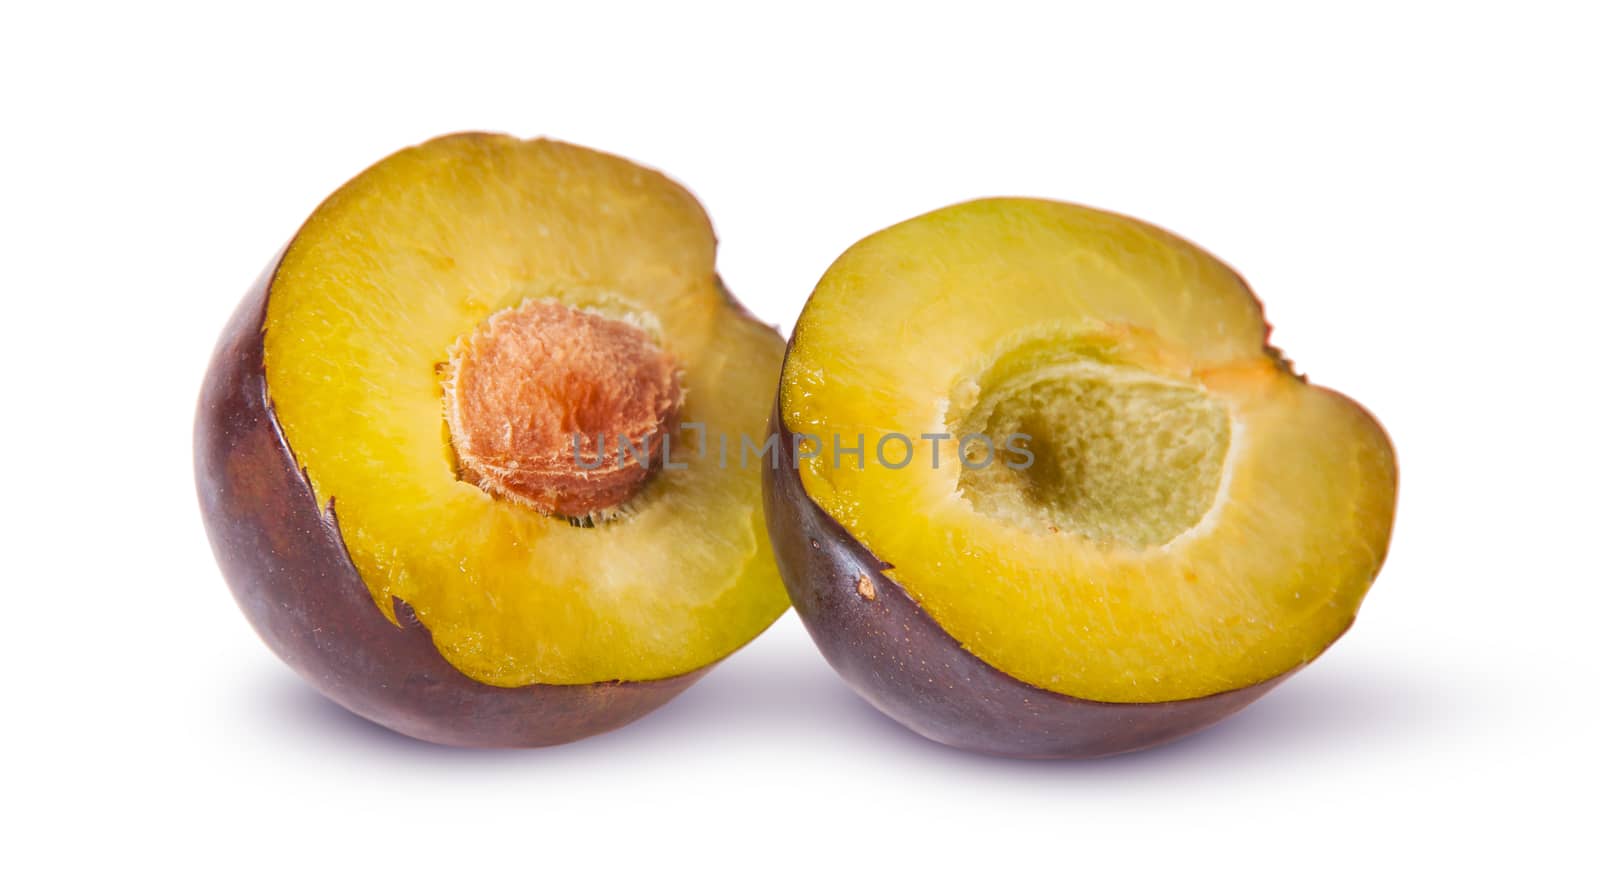 Two halves of violet plums near isolated on white background